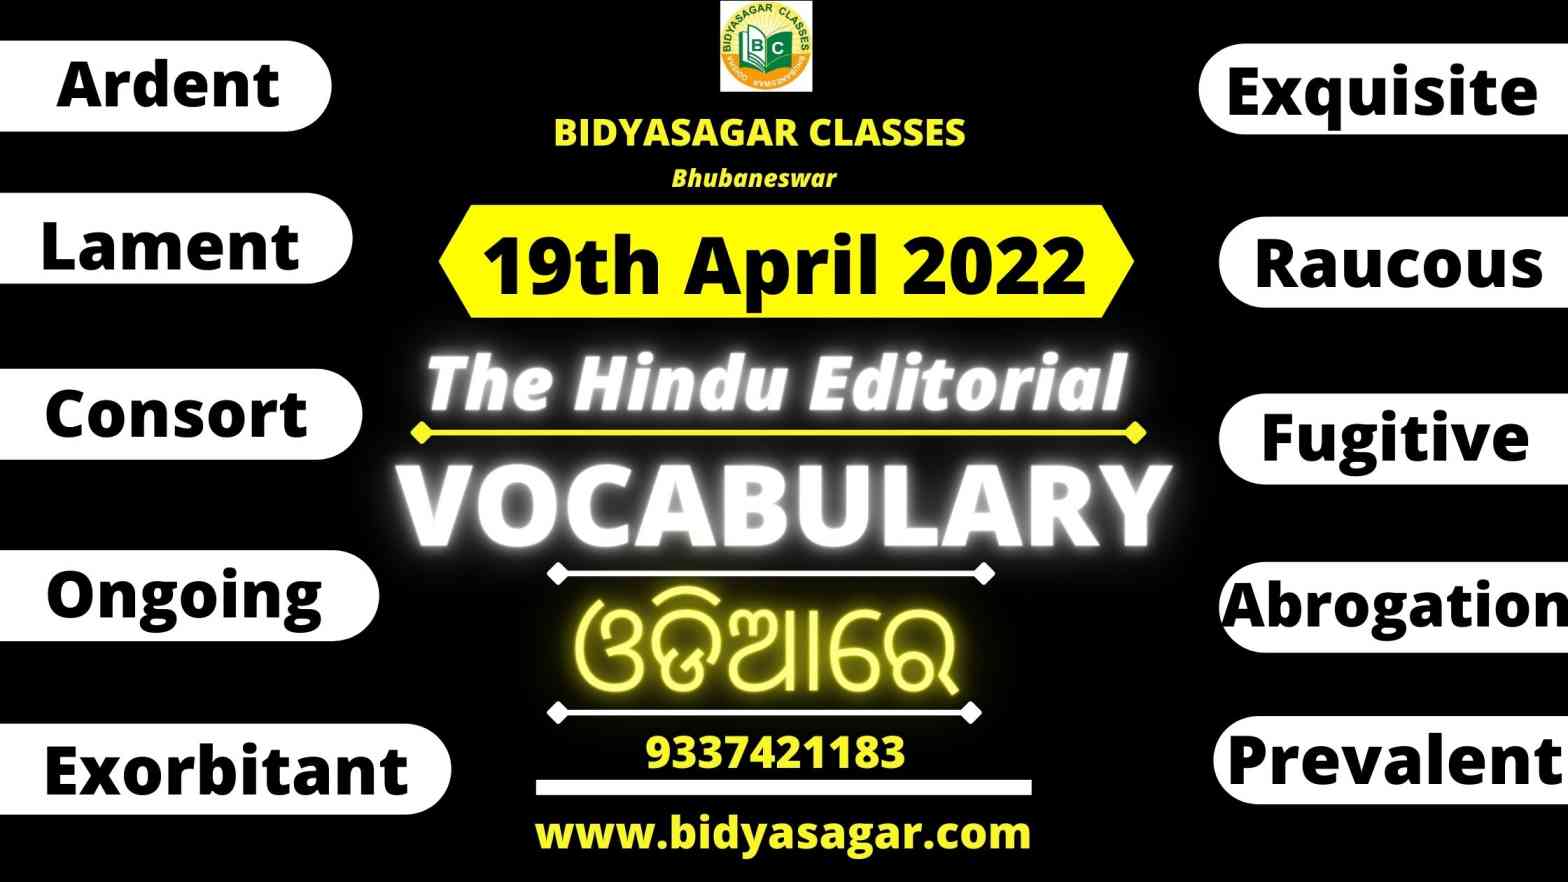 The Hindu Editorial Vocabulary of 19th April 2022